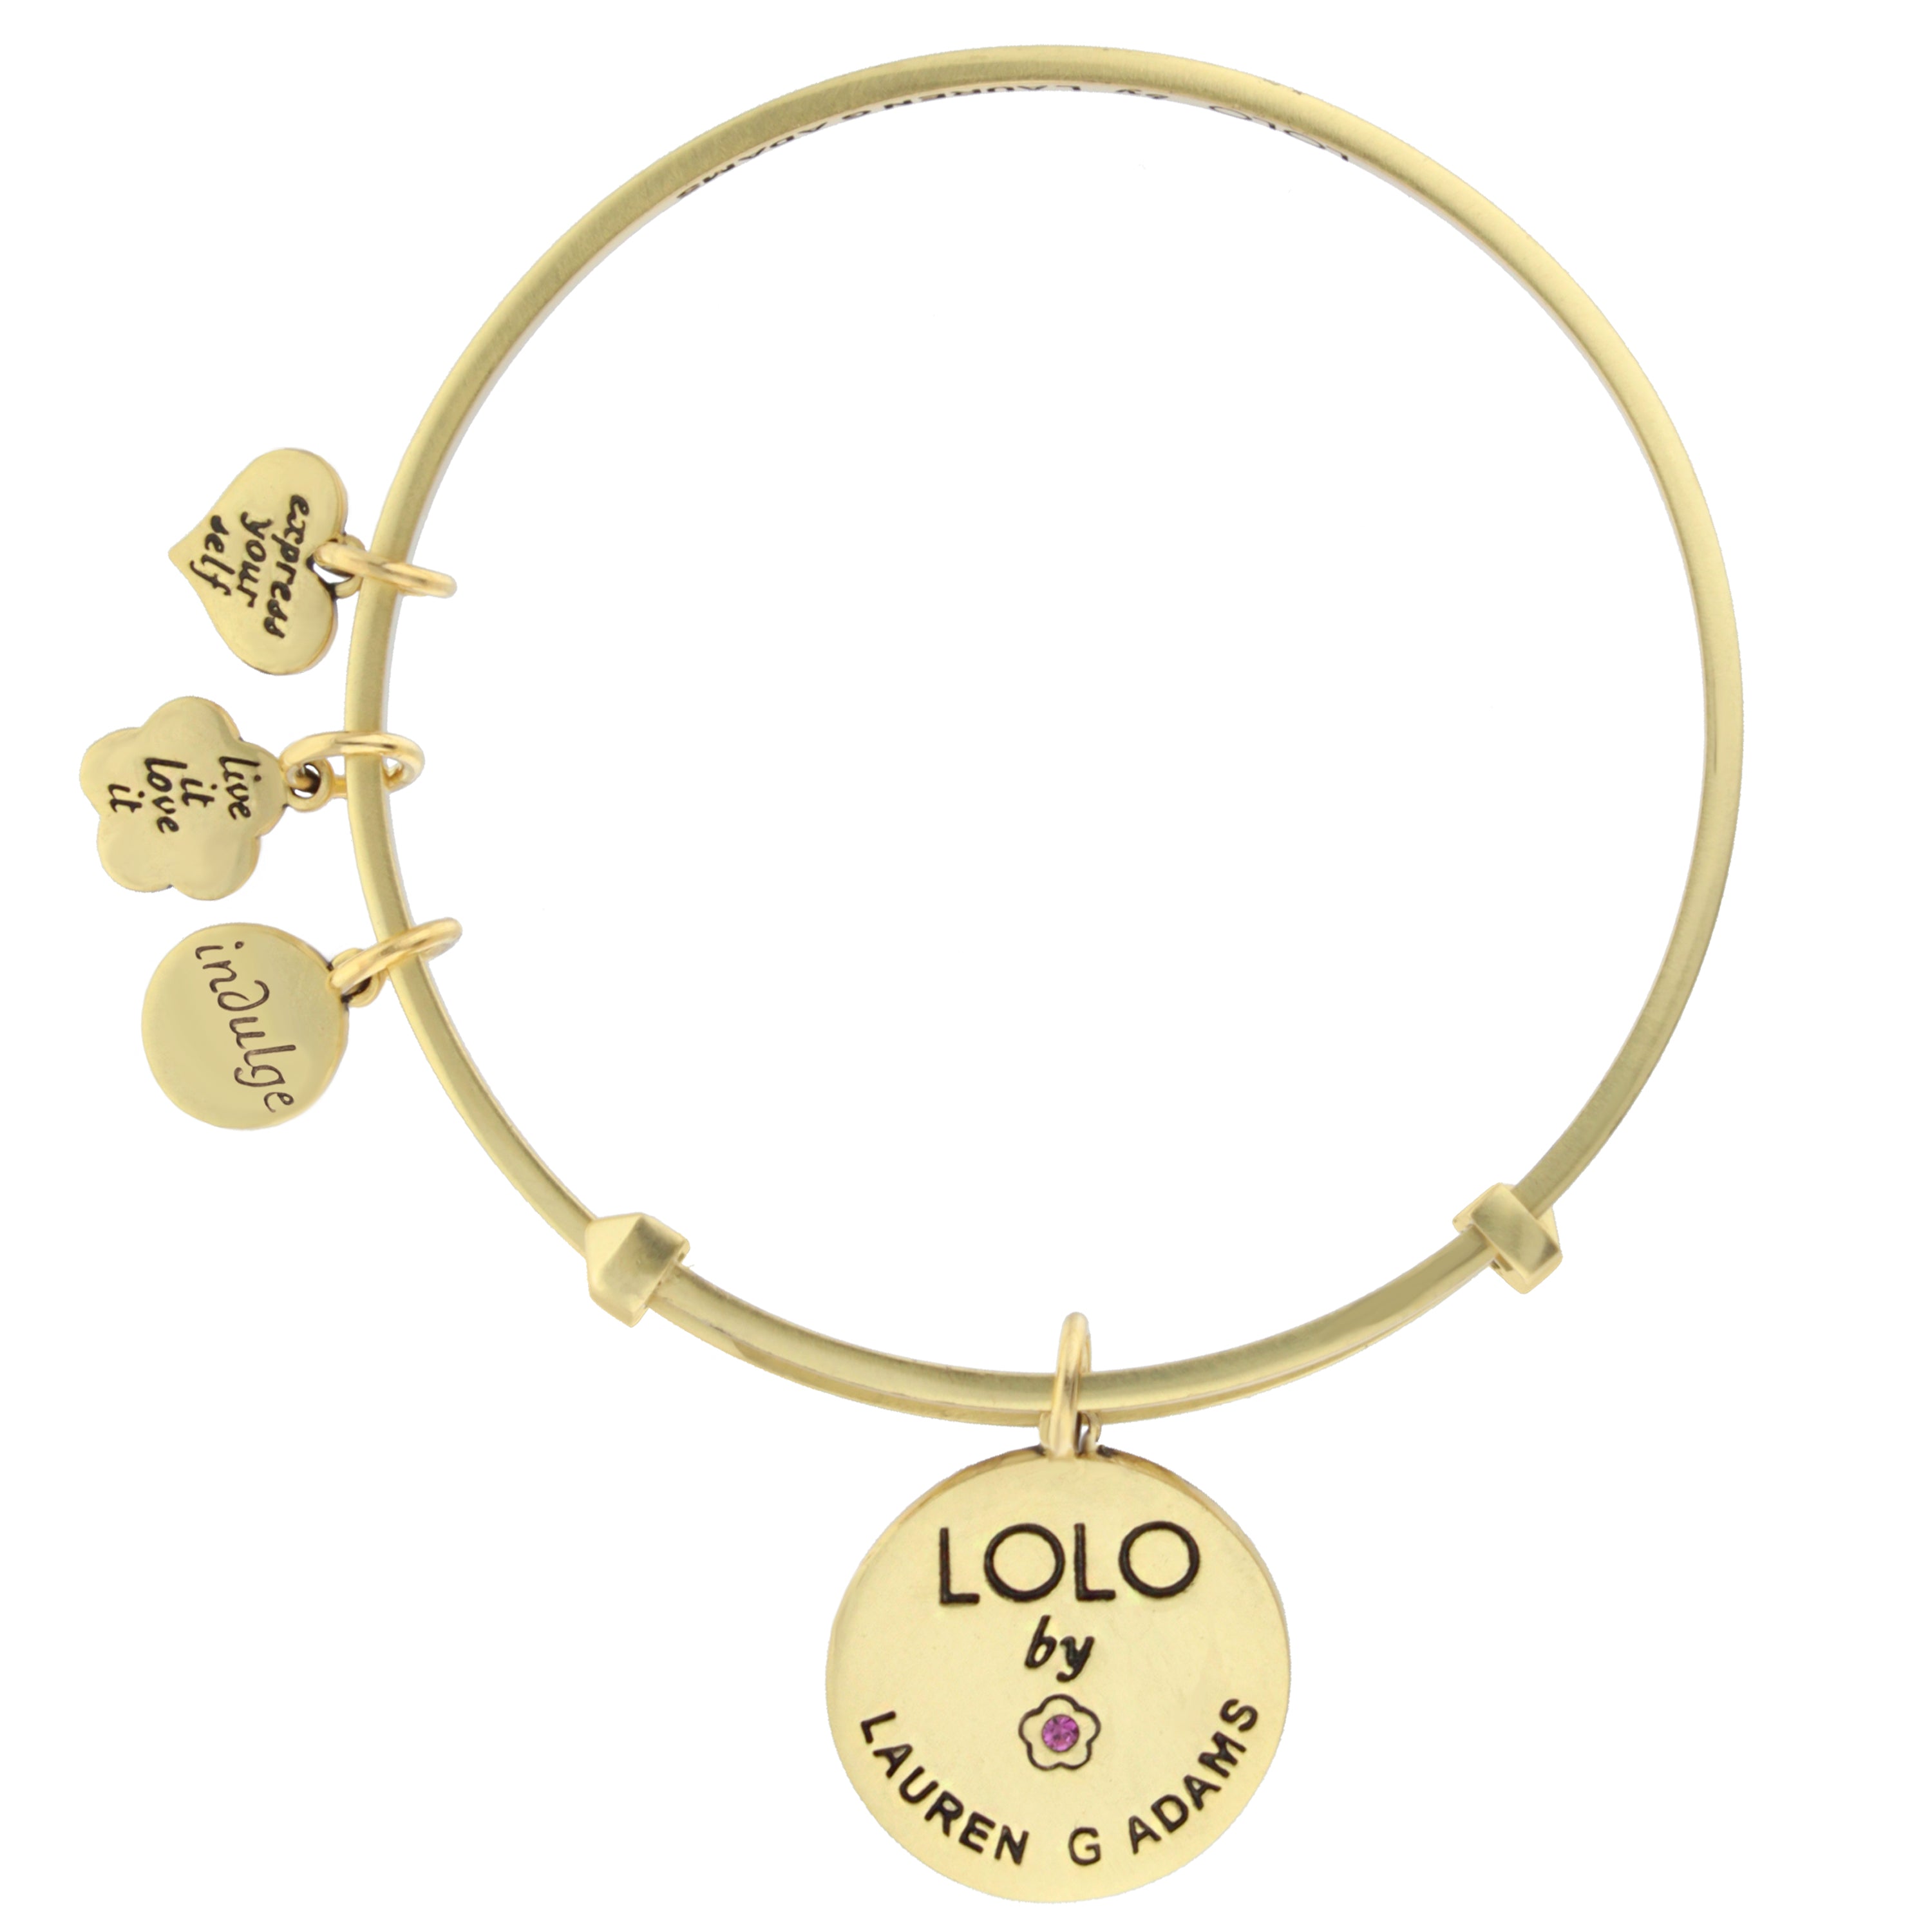 Lolo Butterfly Bangle